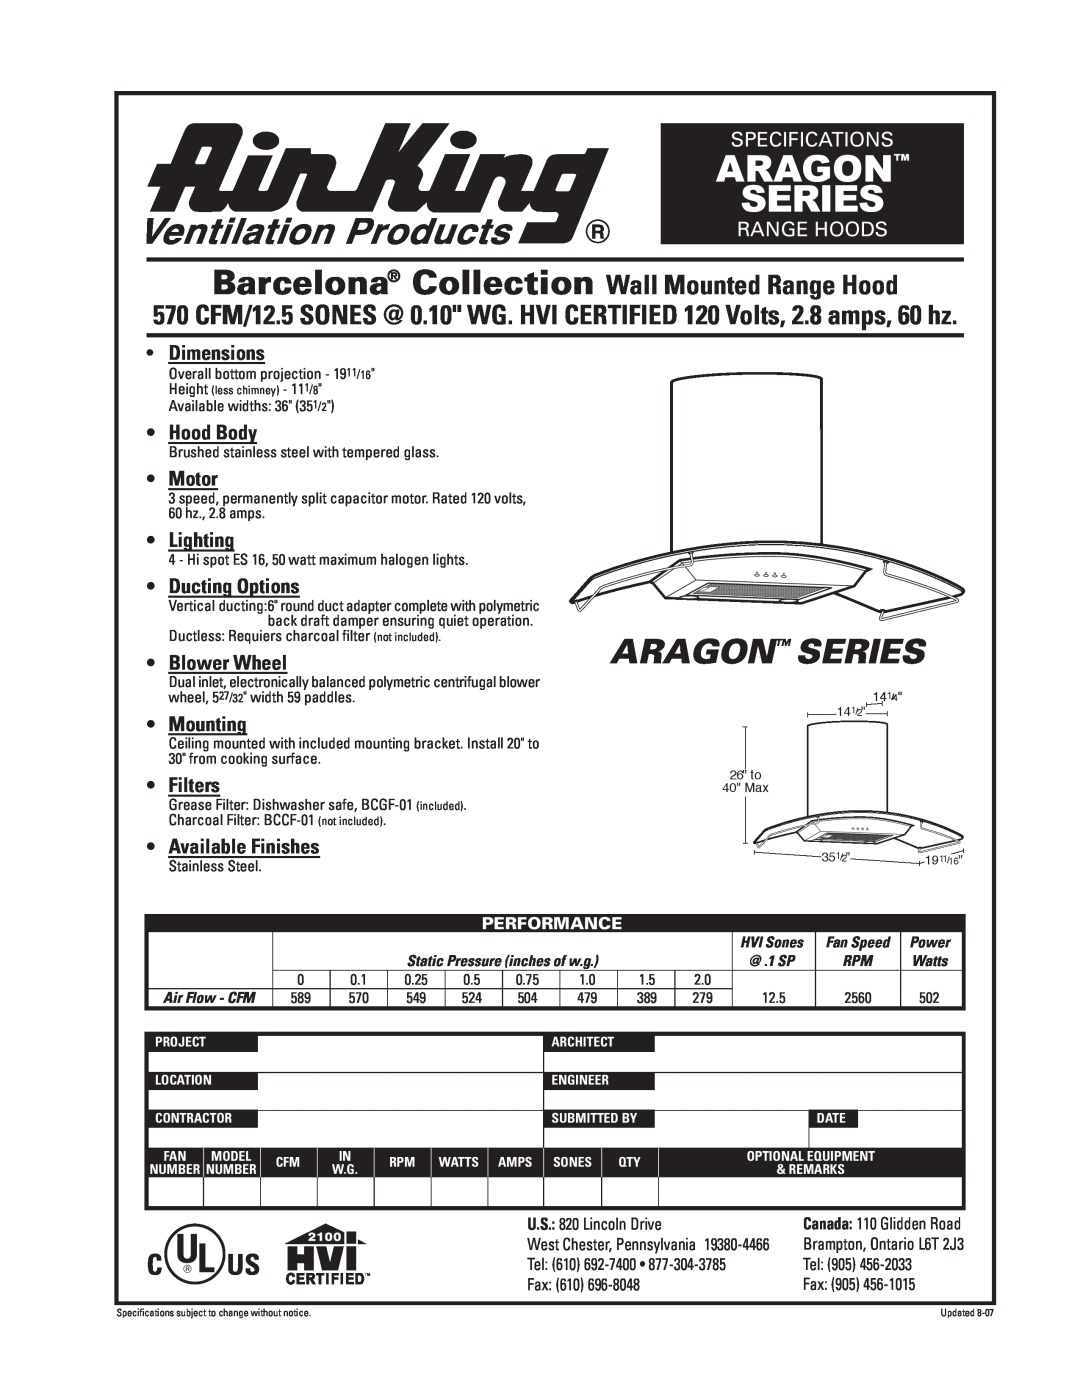 Air King ARAGON SERIES specifications Aragon Series, Barcelona Collection Wall Mounted Range Hood, Specifications, Motor 